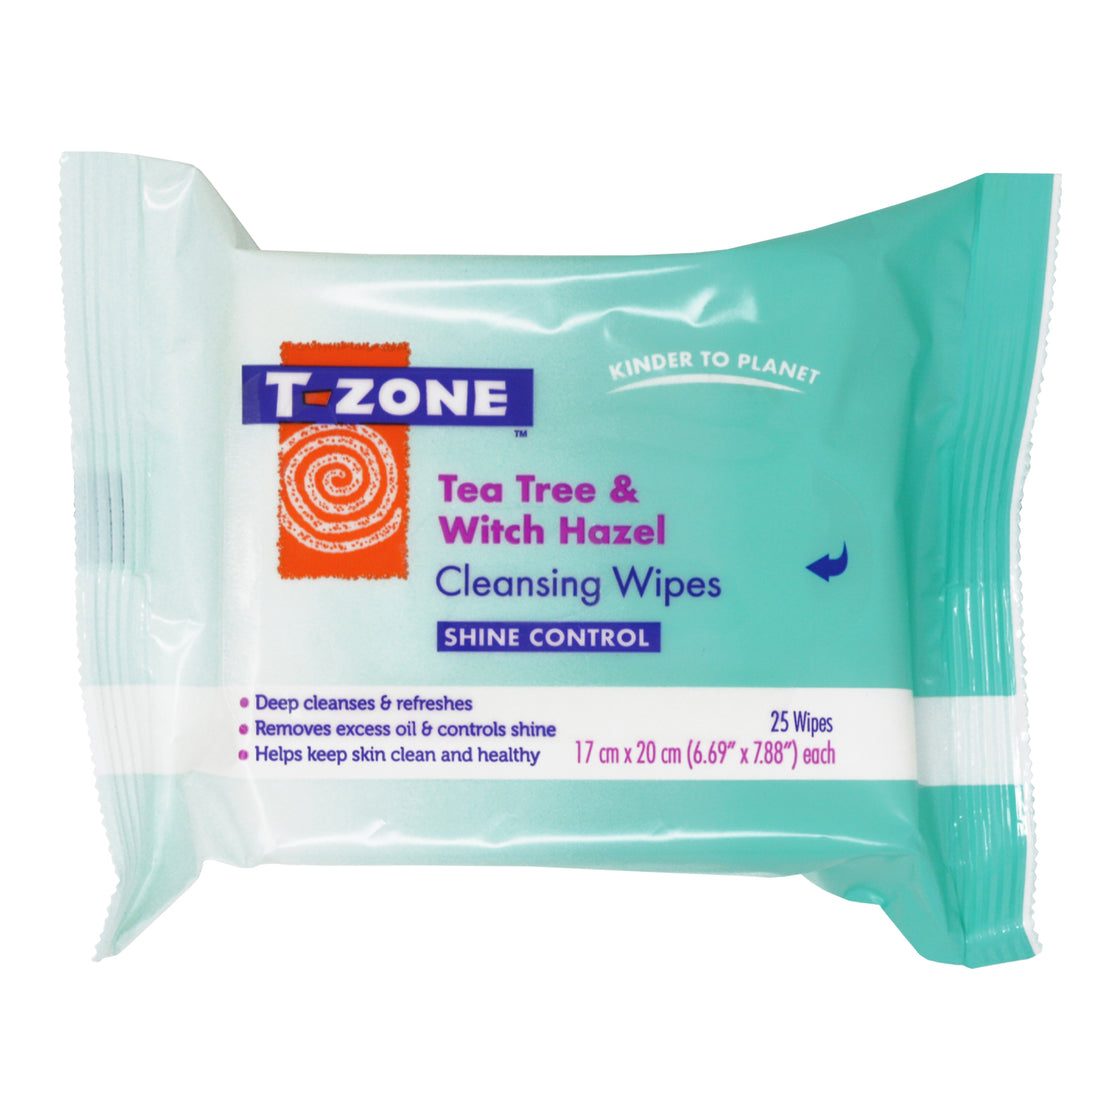 T-Zone Tea Tree Witch Hazel Biodegradable Shine Control Cleansing